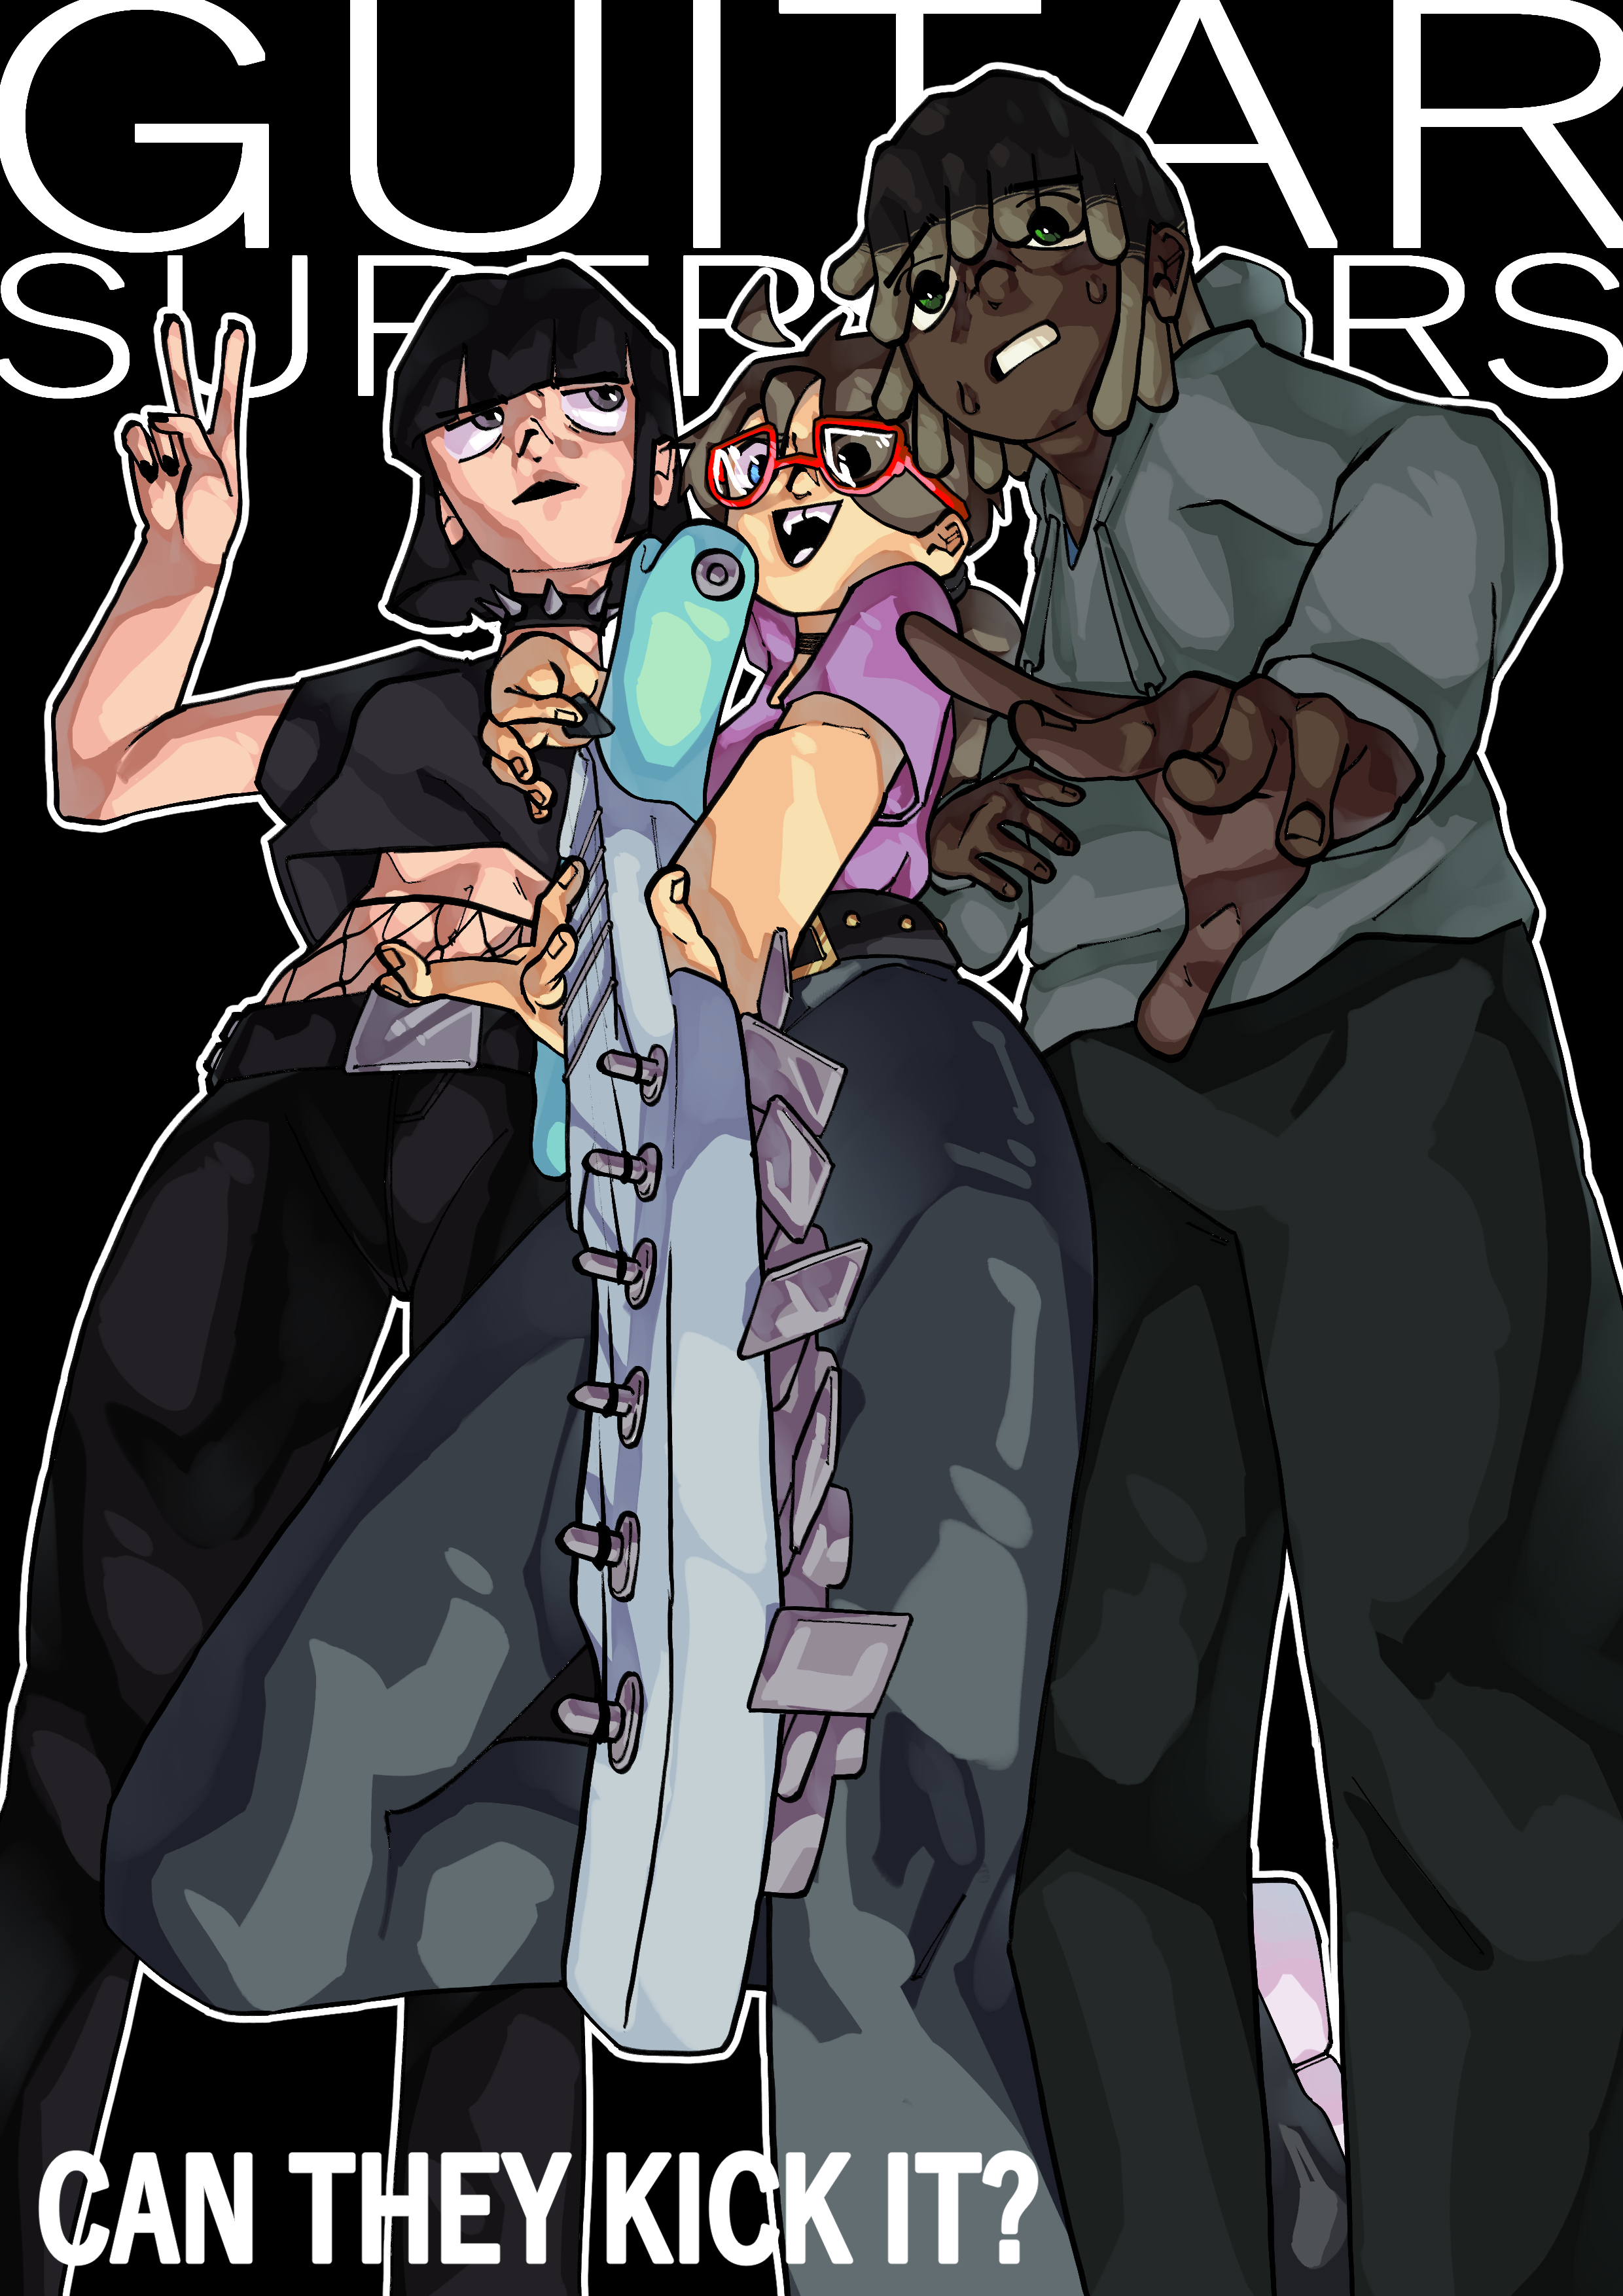 A poster featuring 'GUITAR SUPERSTARS' up top, behind the three characters of (from left to right) Mads, El and Cal. El is holding a guitar towards the camera, and the art is from an incredibly low angle. In the bottom right corner, text reading 'CAN THEY KICK IT?' is visible.